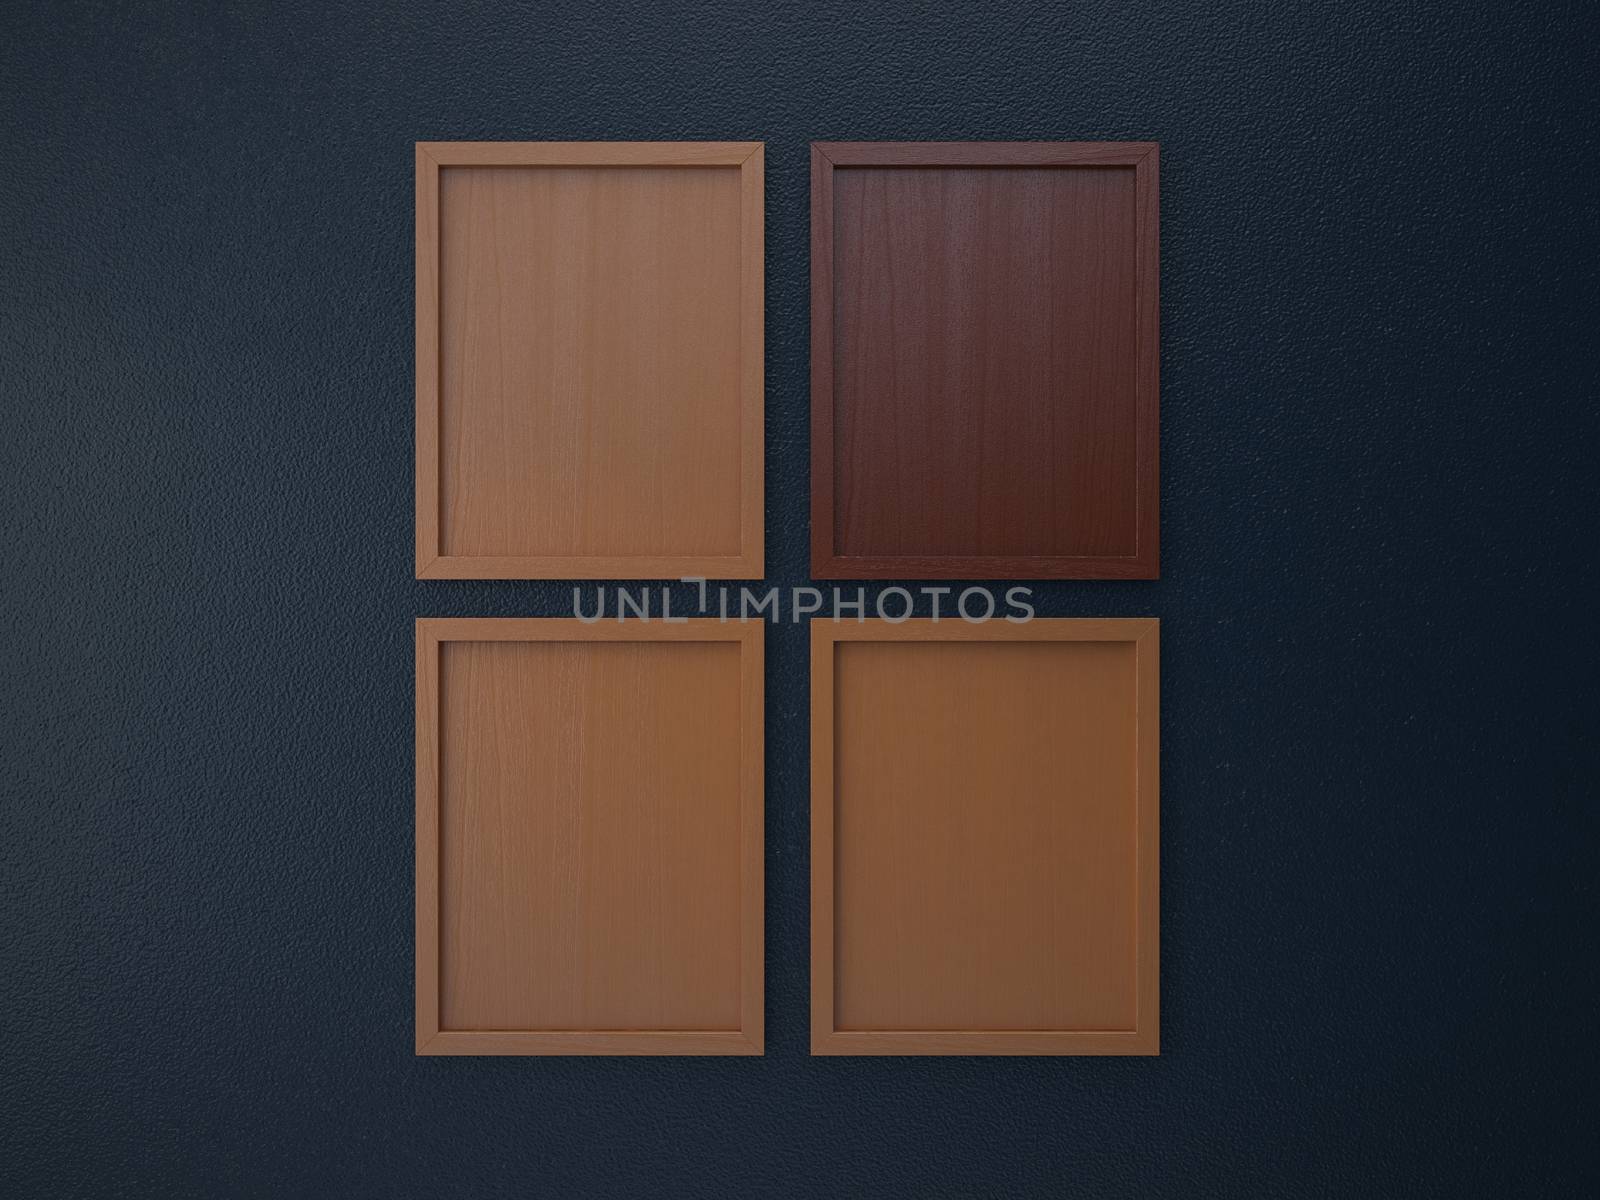 blank frame on interior wall brown and darkblue tone color